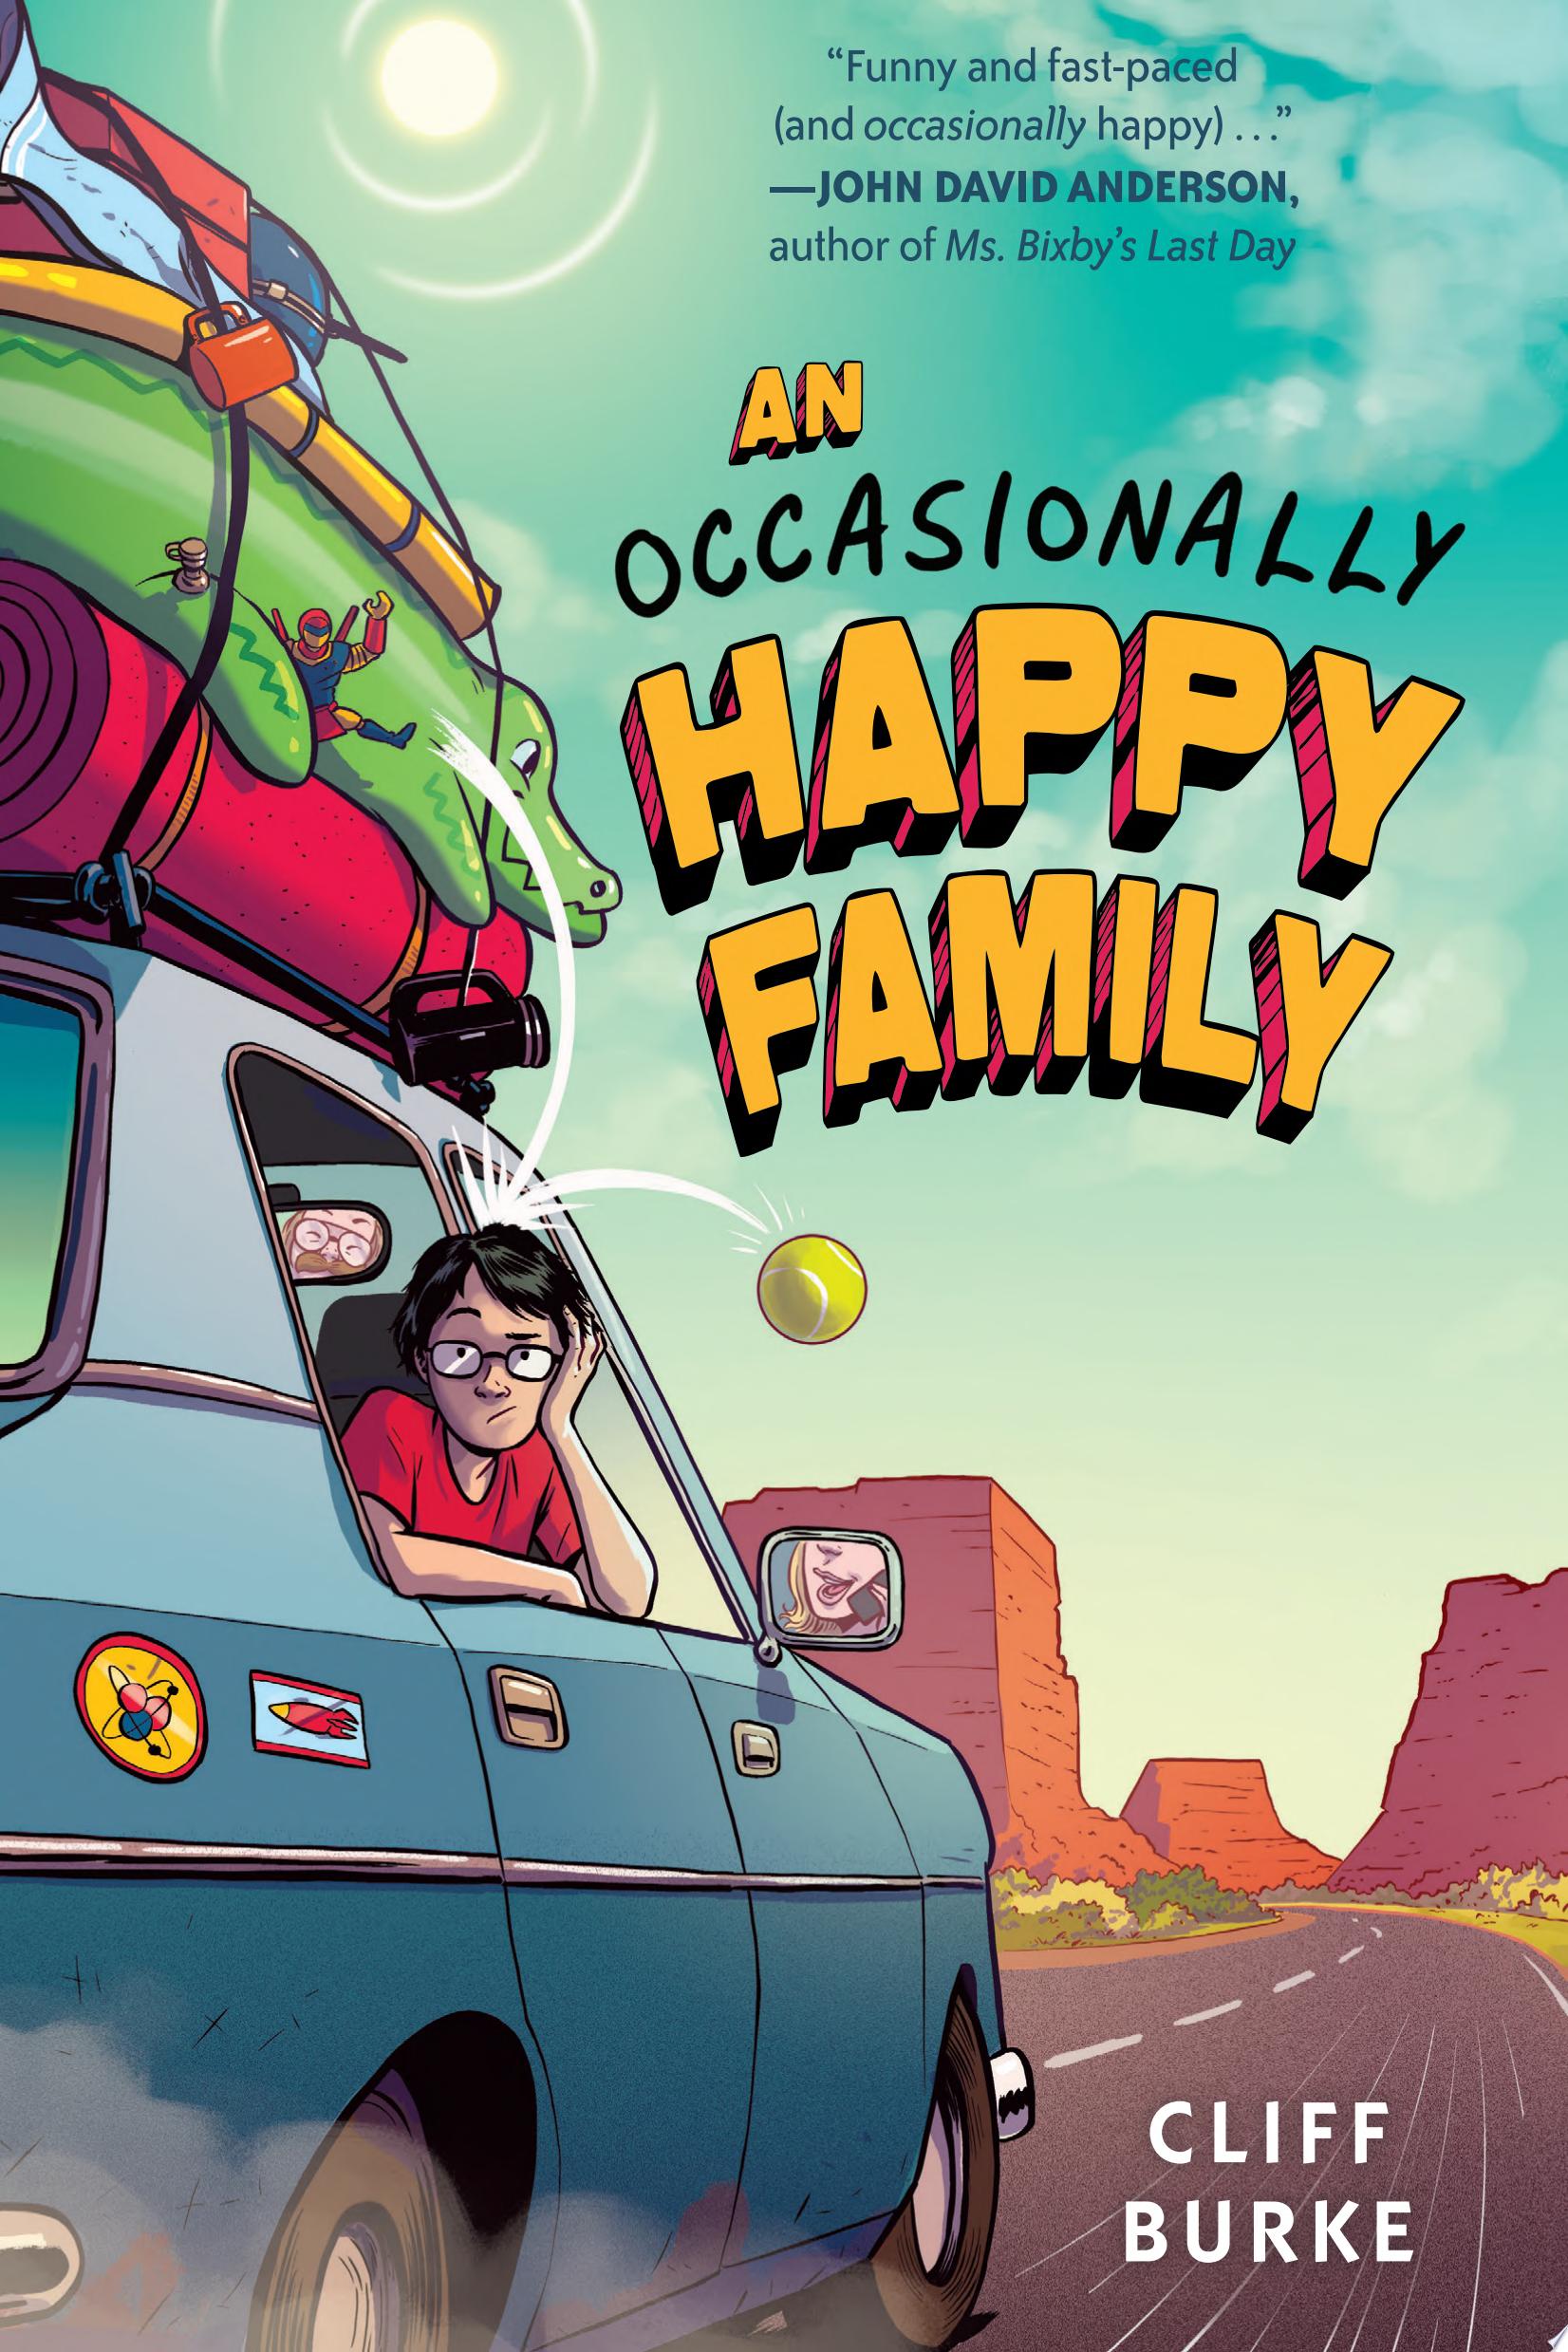 Image for "An Occasionally Happy Family"